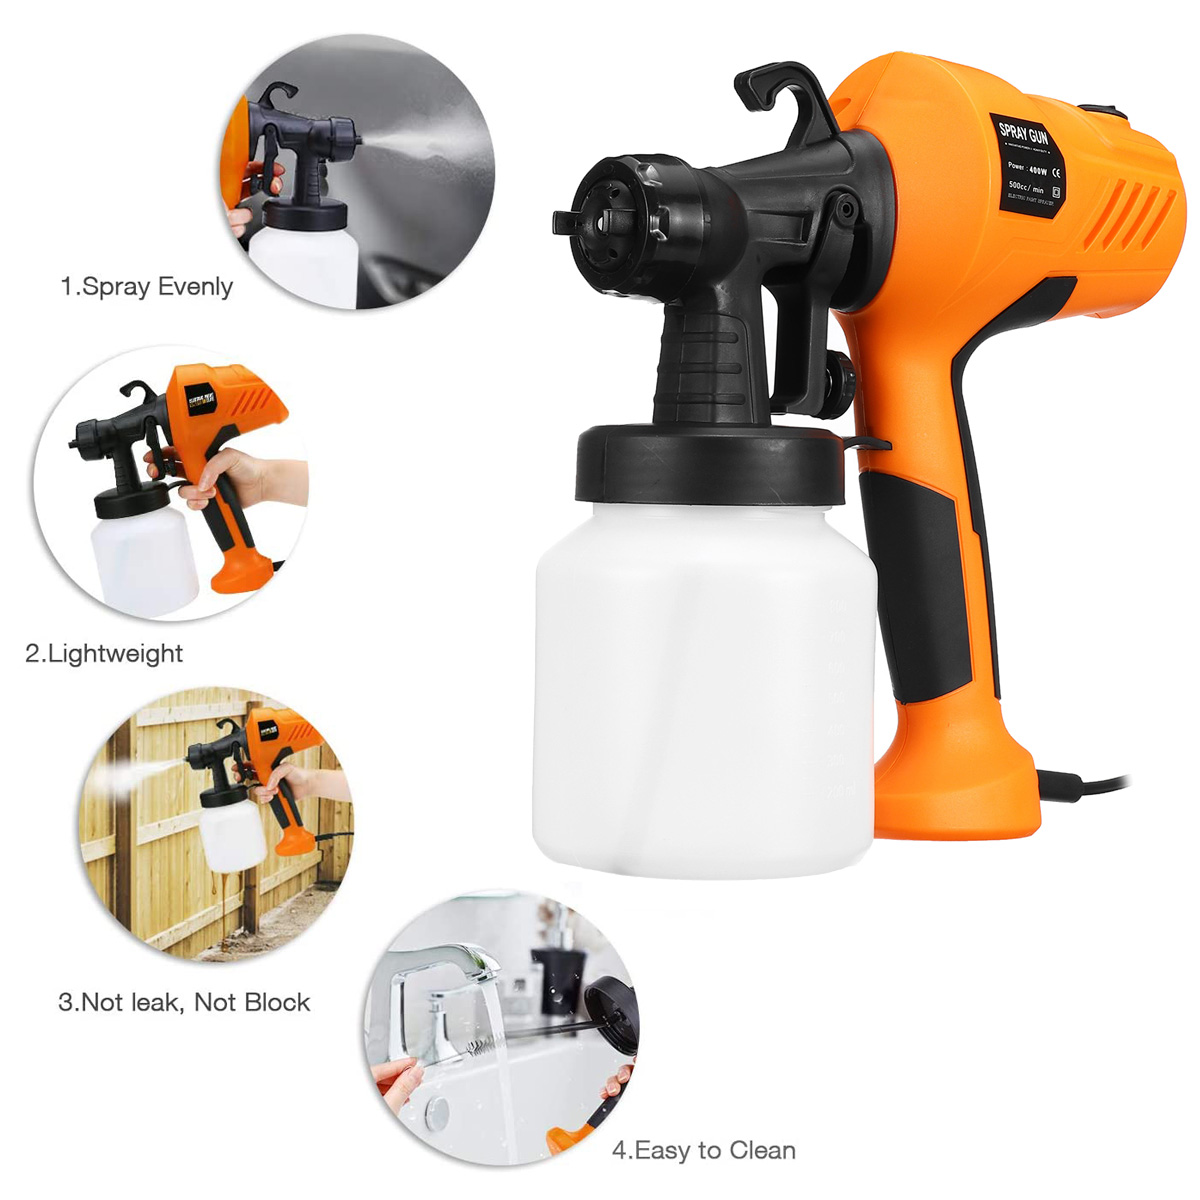 Electric-Spray-Gun-220V-Home-Electric-Paint-Sprayer-Easy-Spraying-Cleaning-Perfect-for-Beginner-Desi-1886820-3